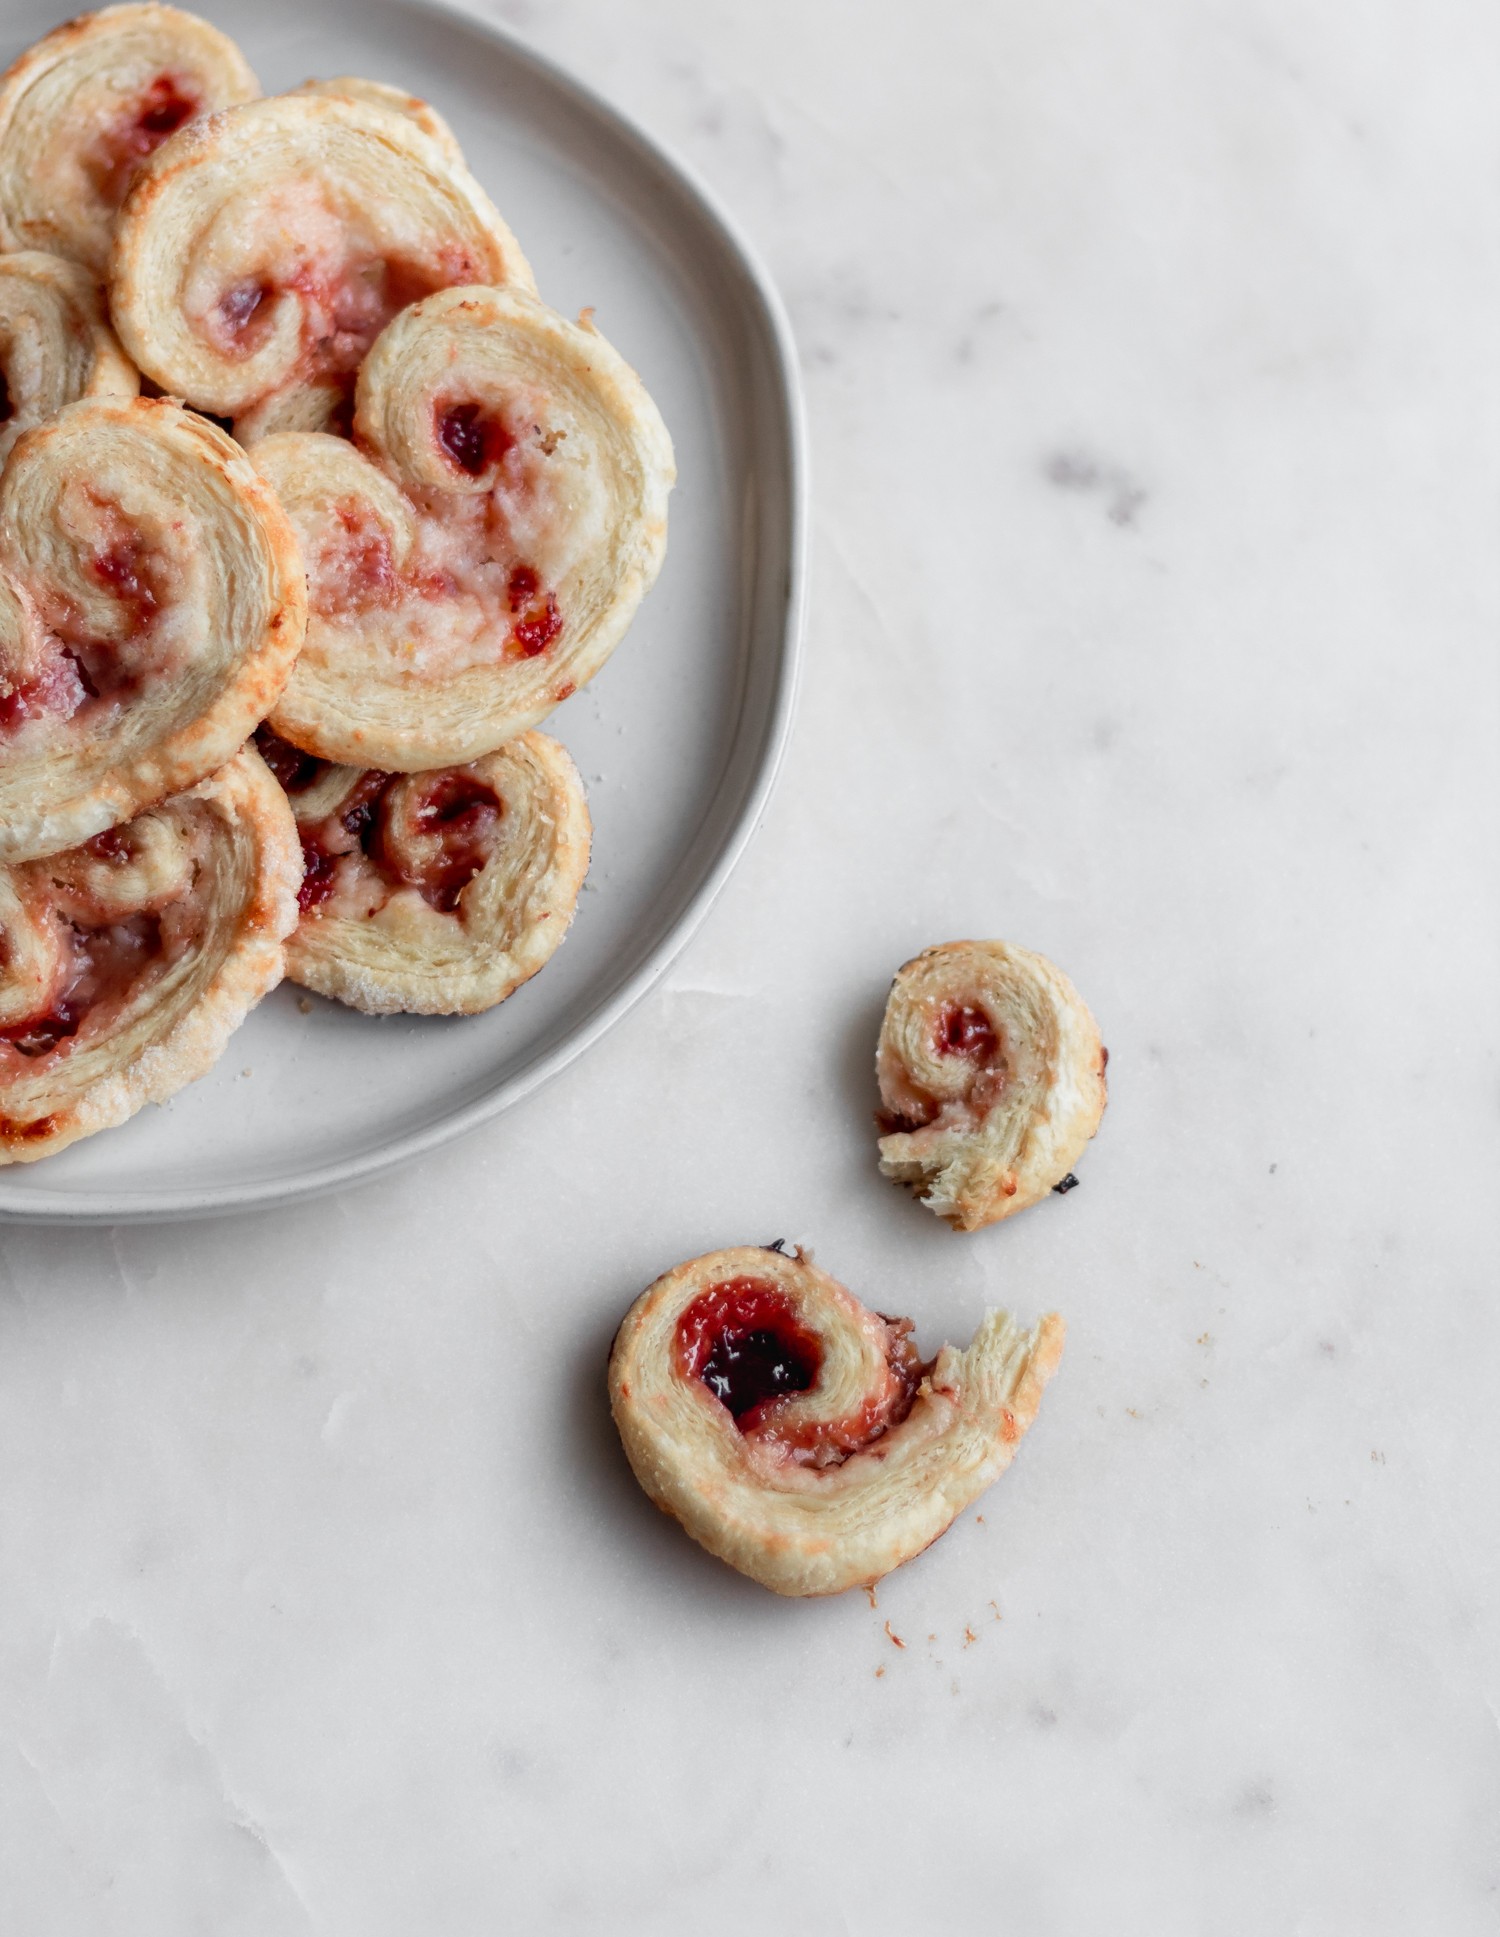 An overhead image of a broken strawberry palmier on a white counter next to a white plate with more cookies.